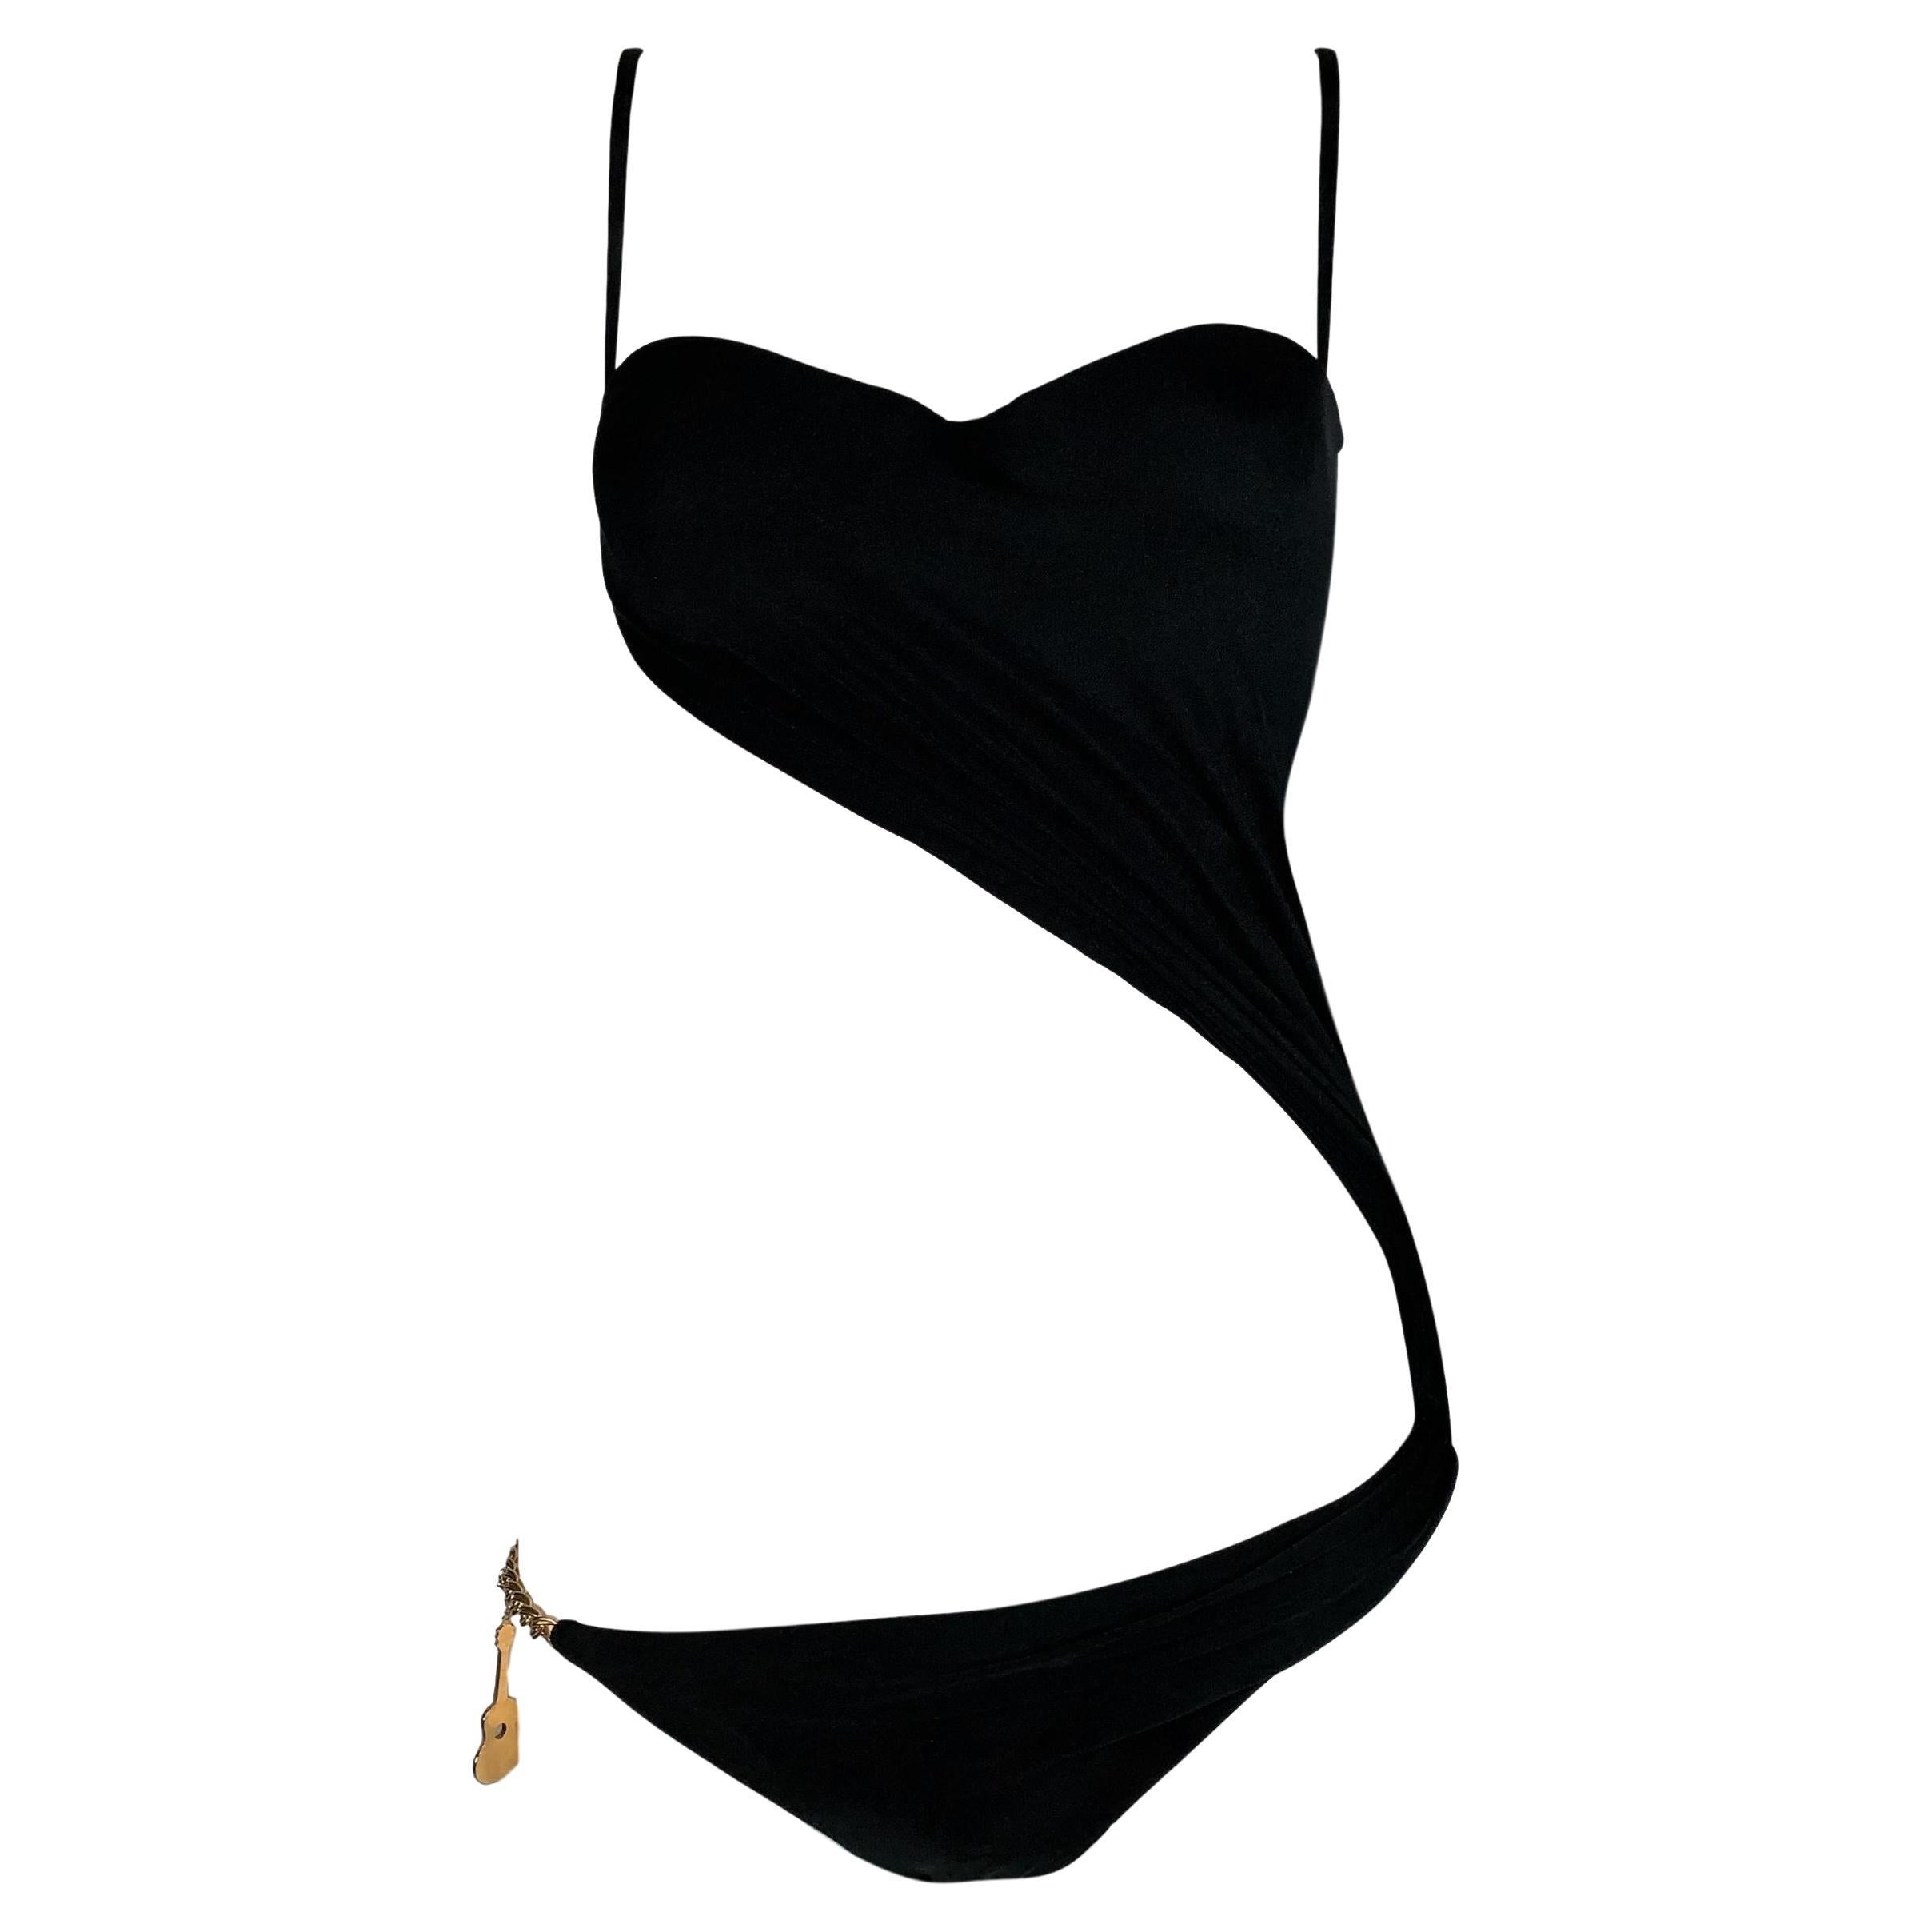 Gianni Versace Runway Cut-Out Swimsuit